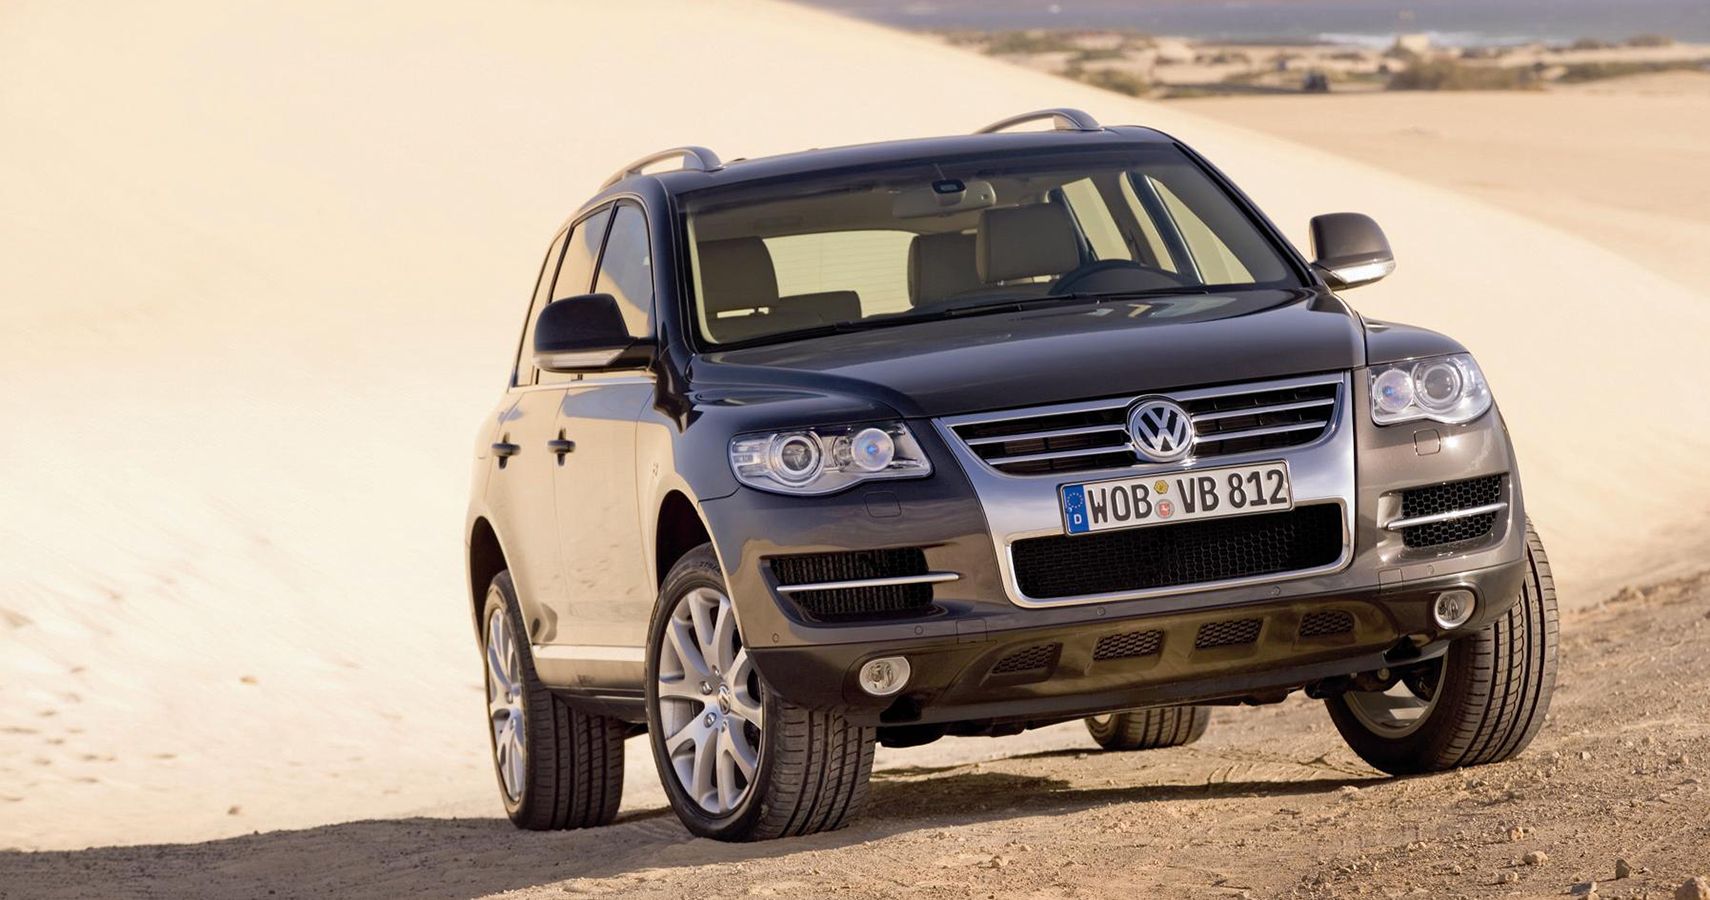 Silver Volkswagen Touareg Parked Off-Road